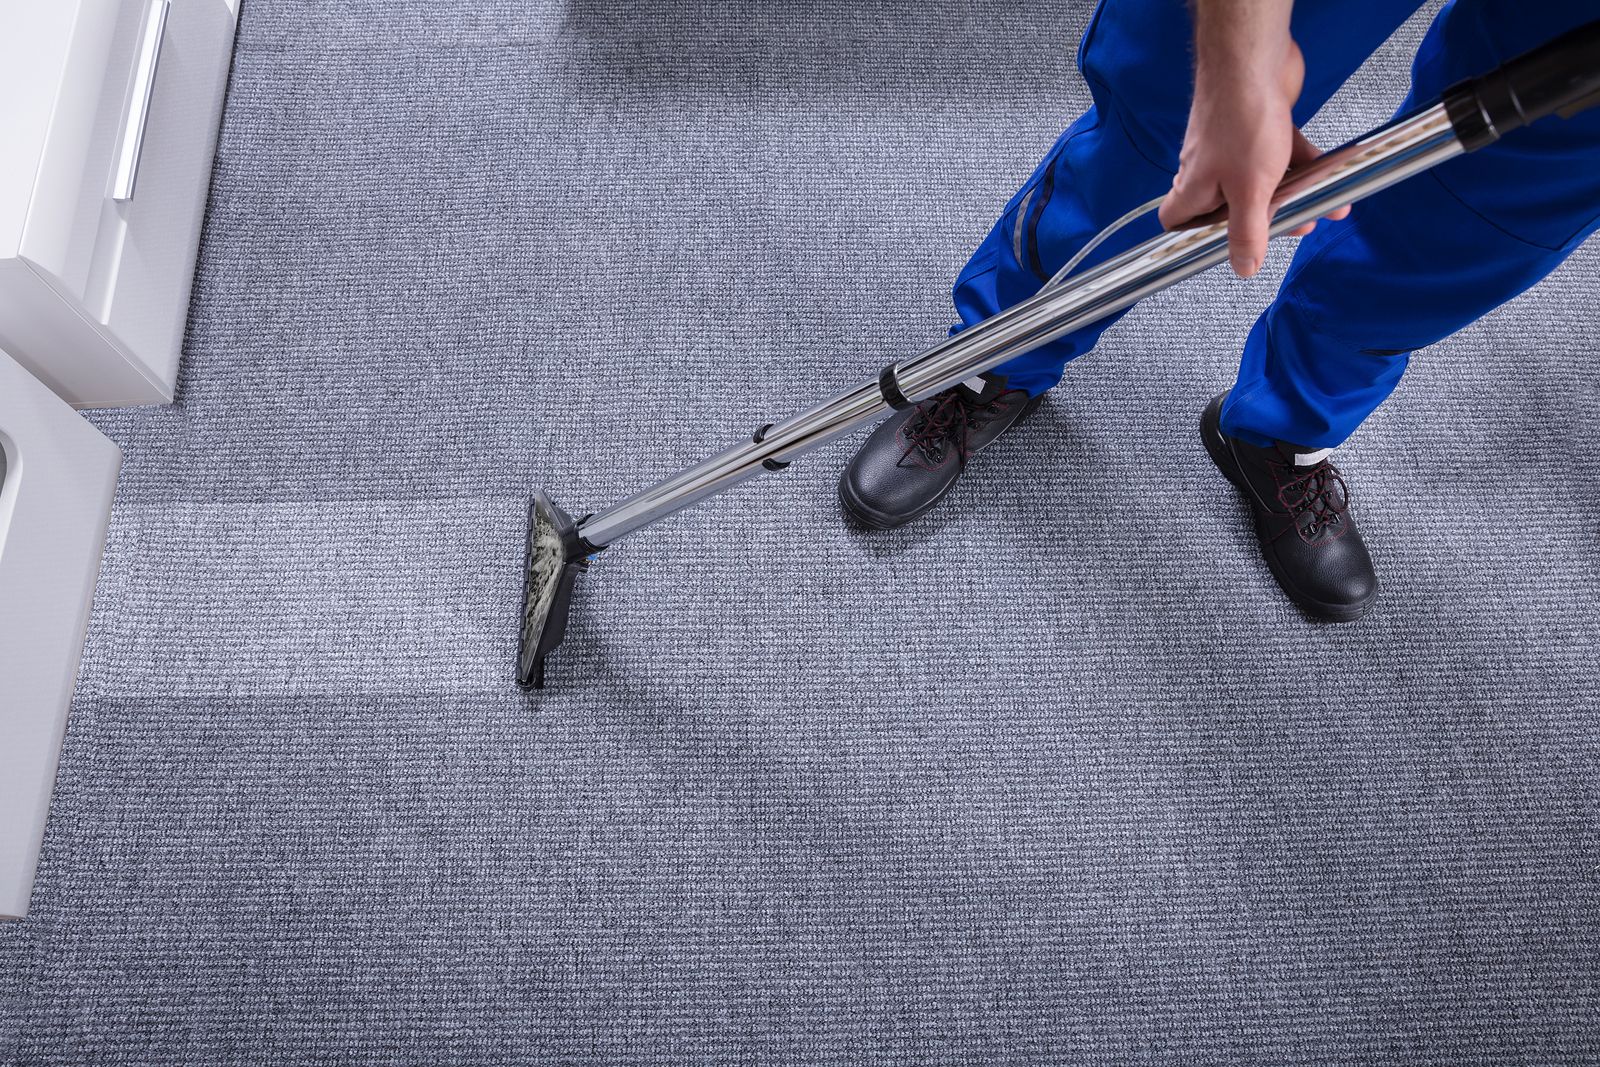 Carpet cleaning perth